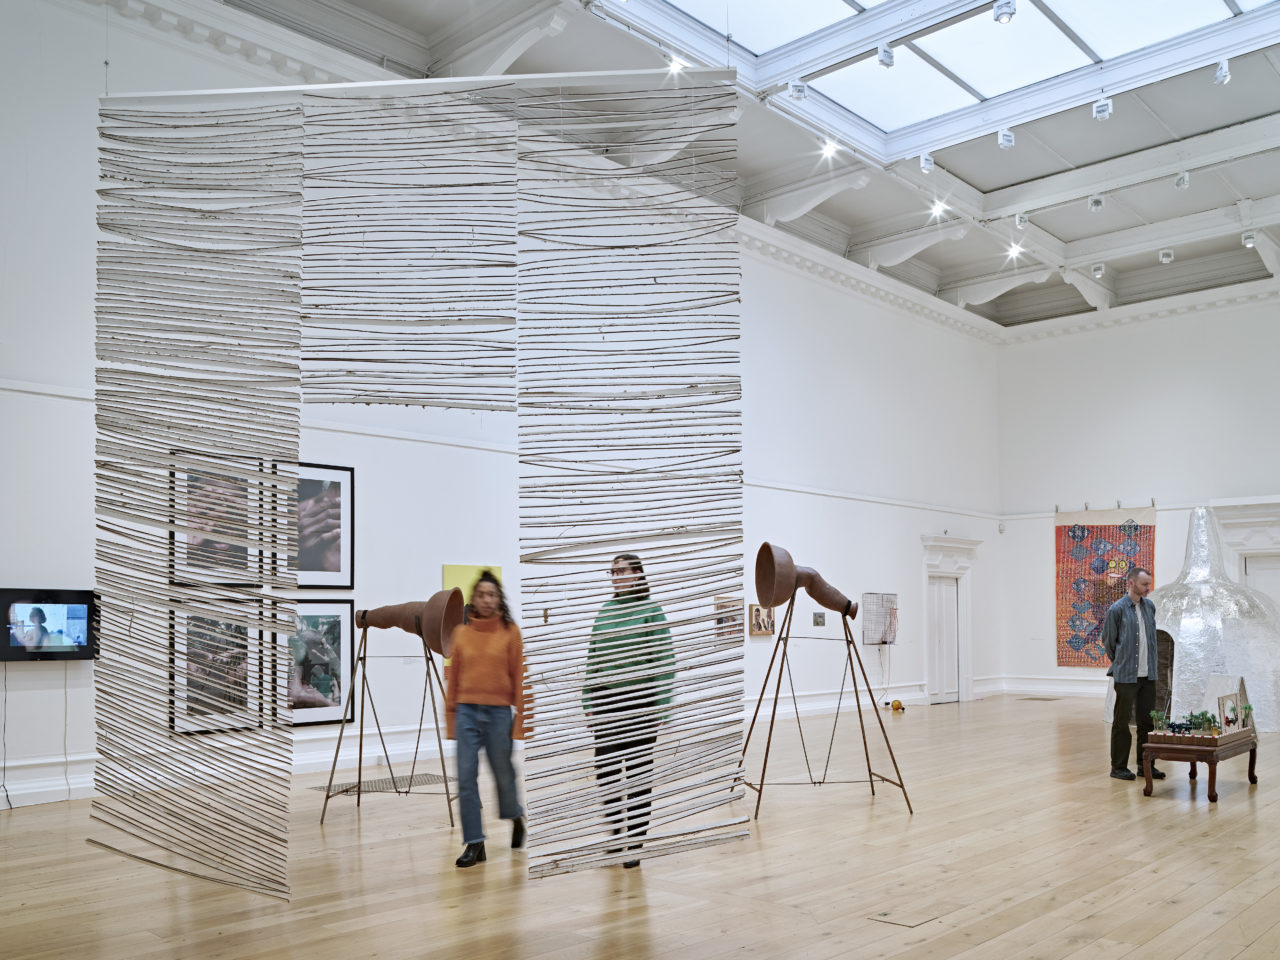 Visitors in a gallery surrounded by works of art